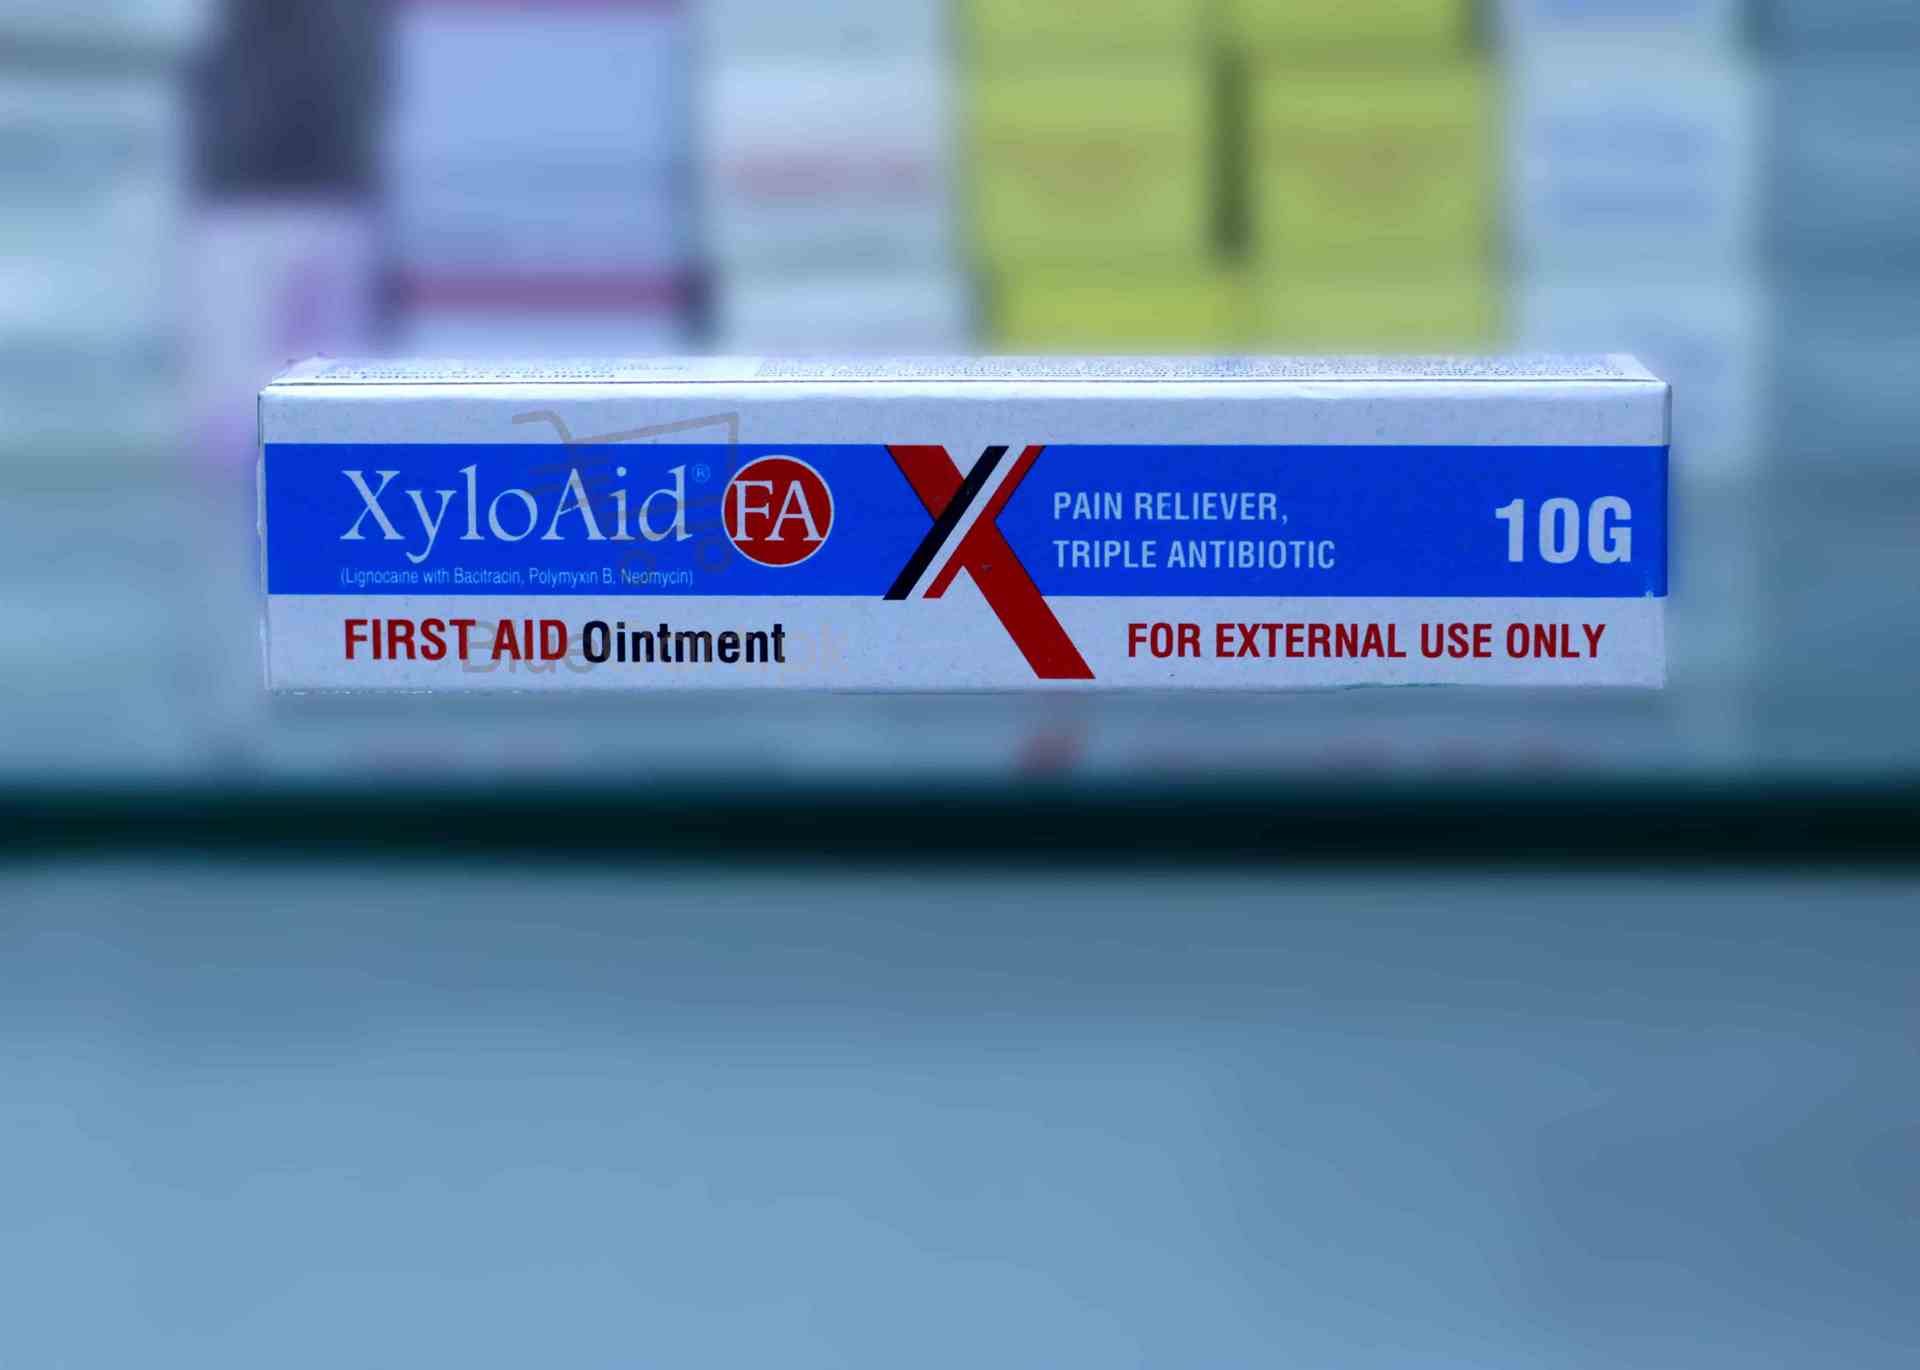 Xyloaid Ointment